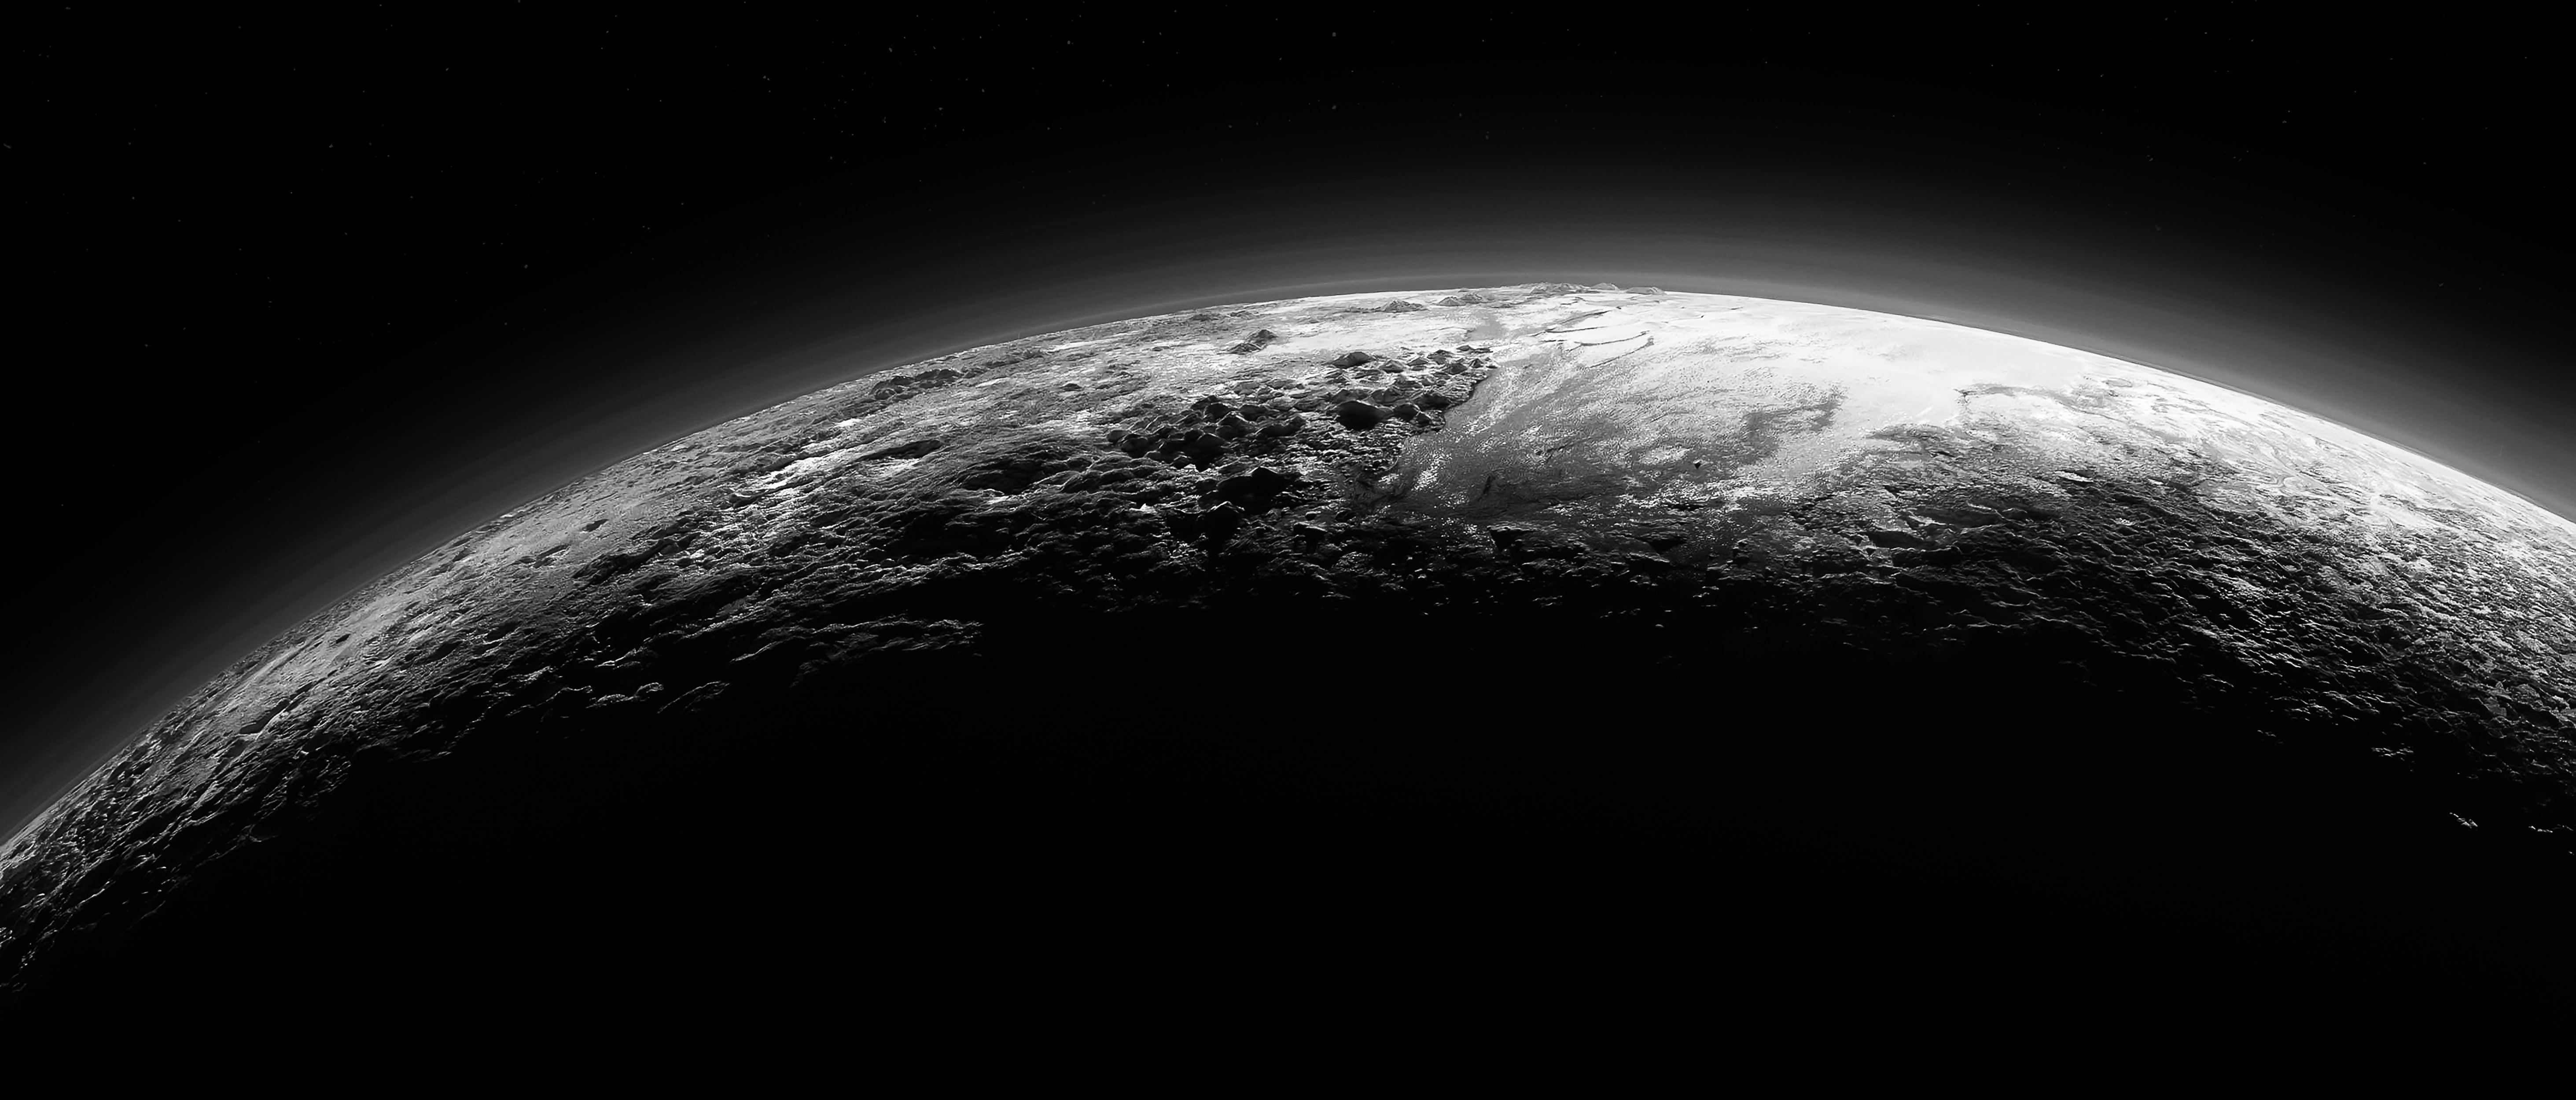 gayscale planet earth, Pluto, space, planet, monochrome